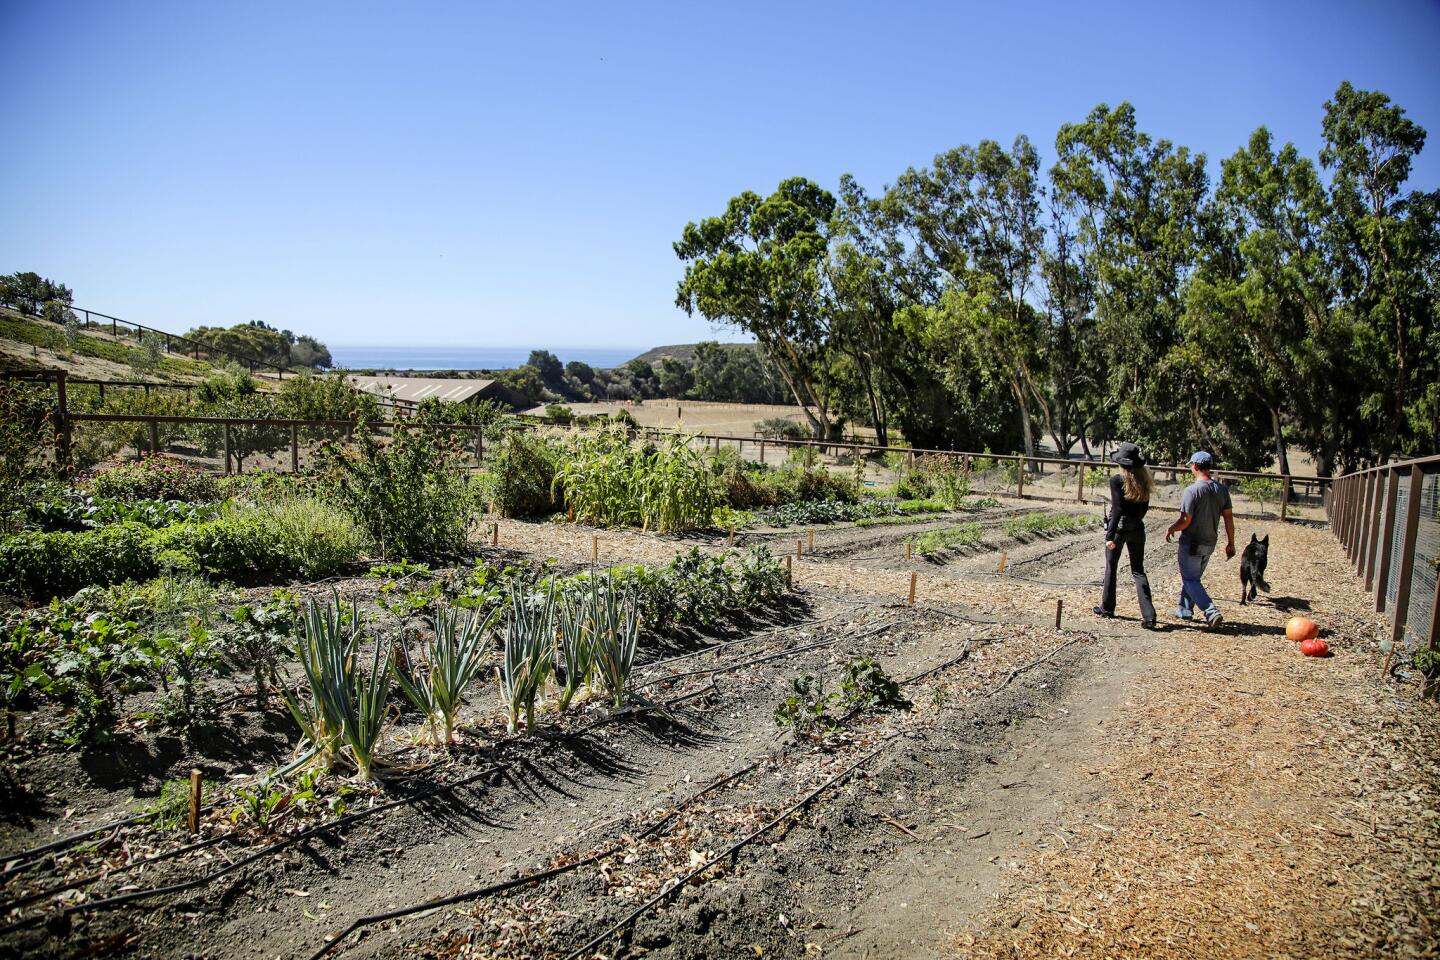 The Hollister Ranch garden of James and Suzy Amis Cameron